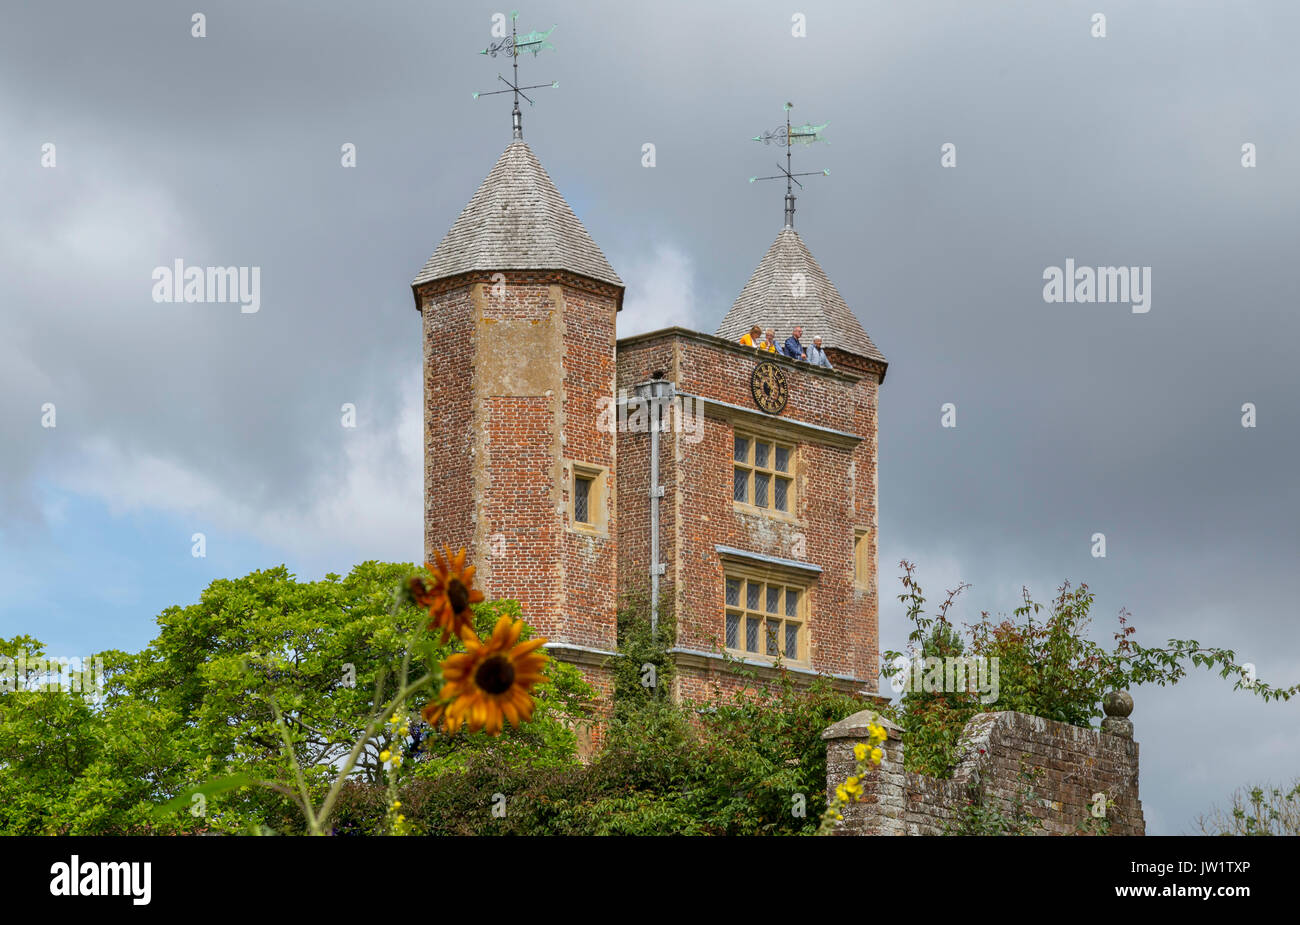 People enjoying the garden view from the Elizabethan tower of Sissinghurst Castle, Kent, England, United Kingdom. Stock Photo